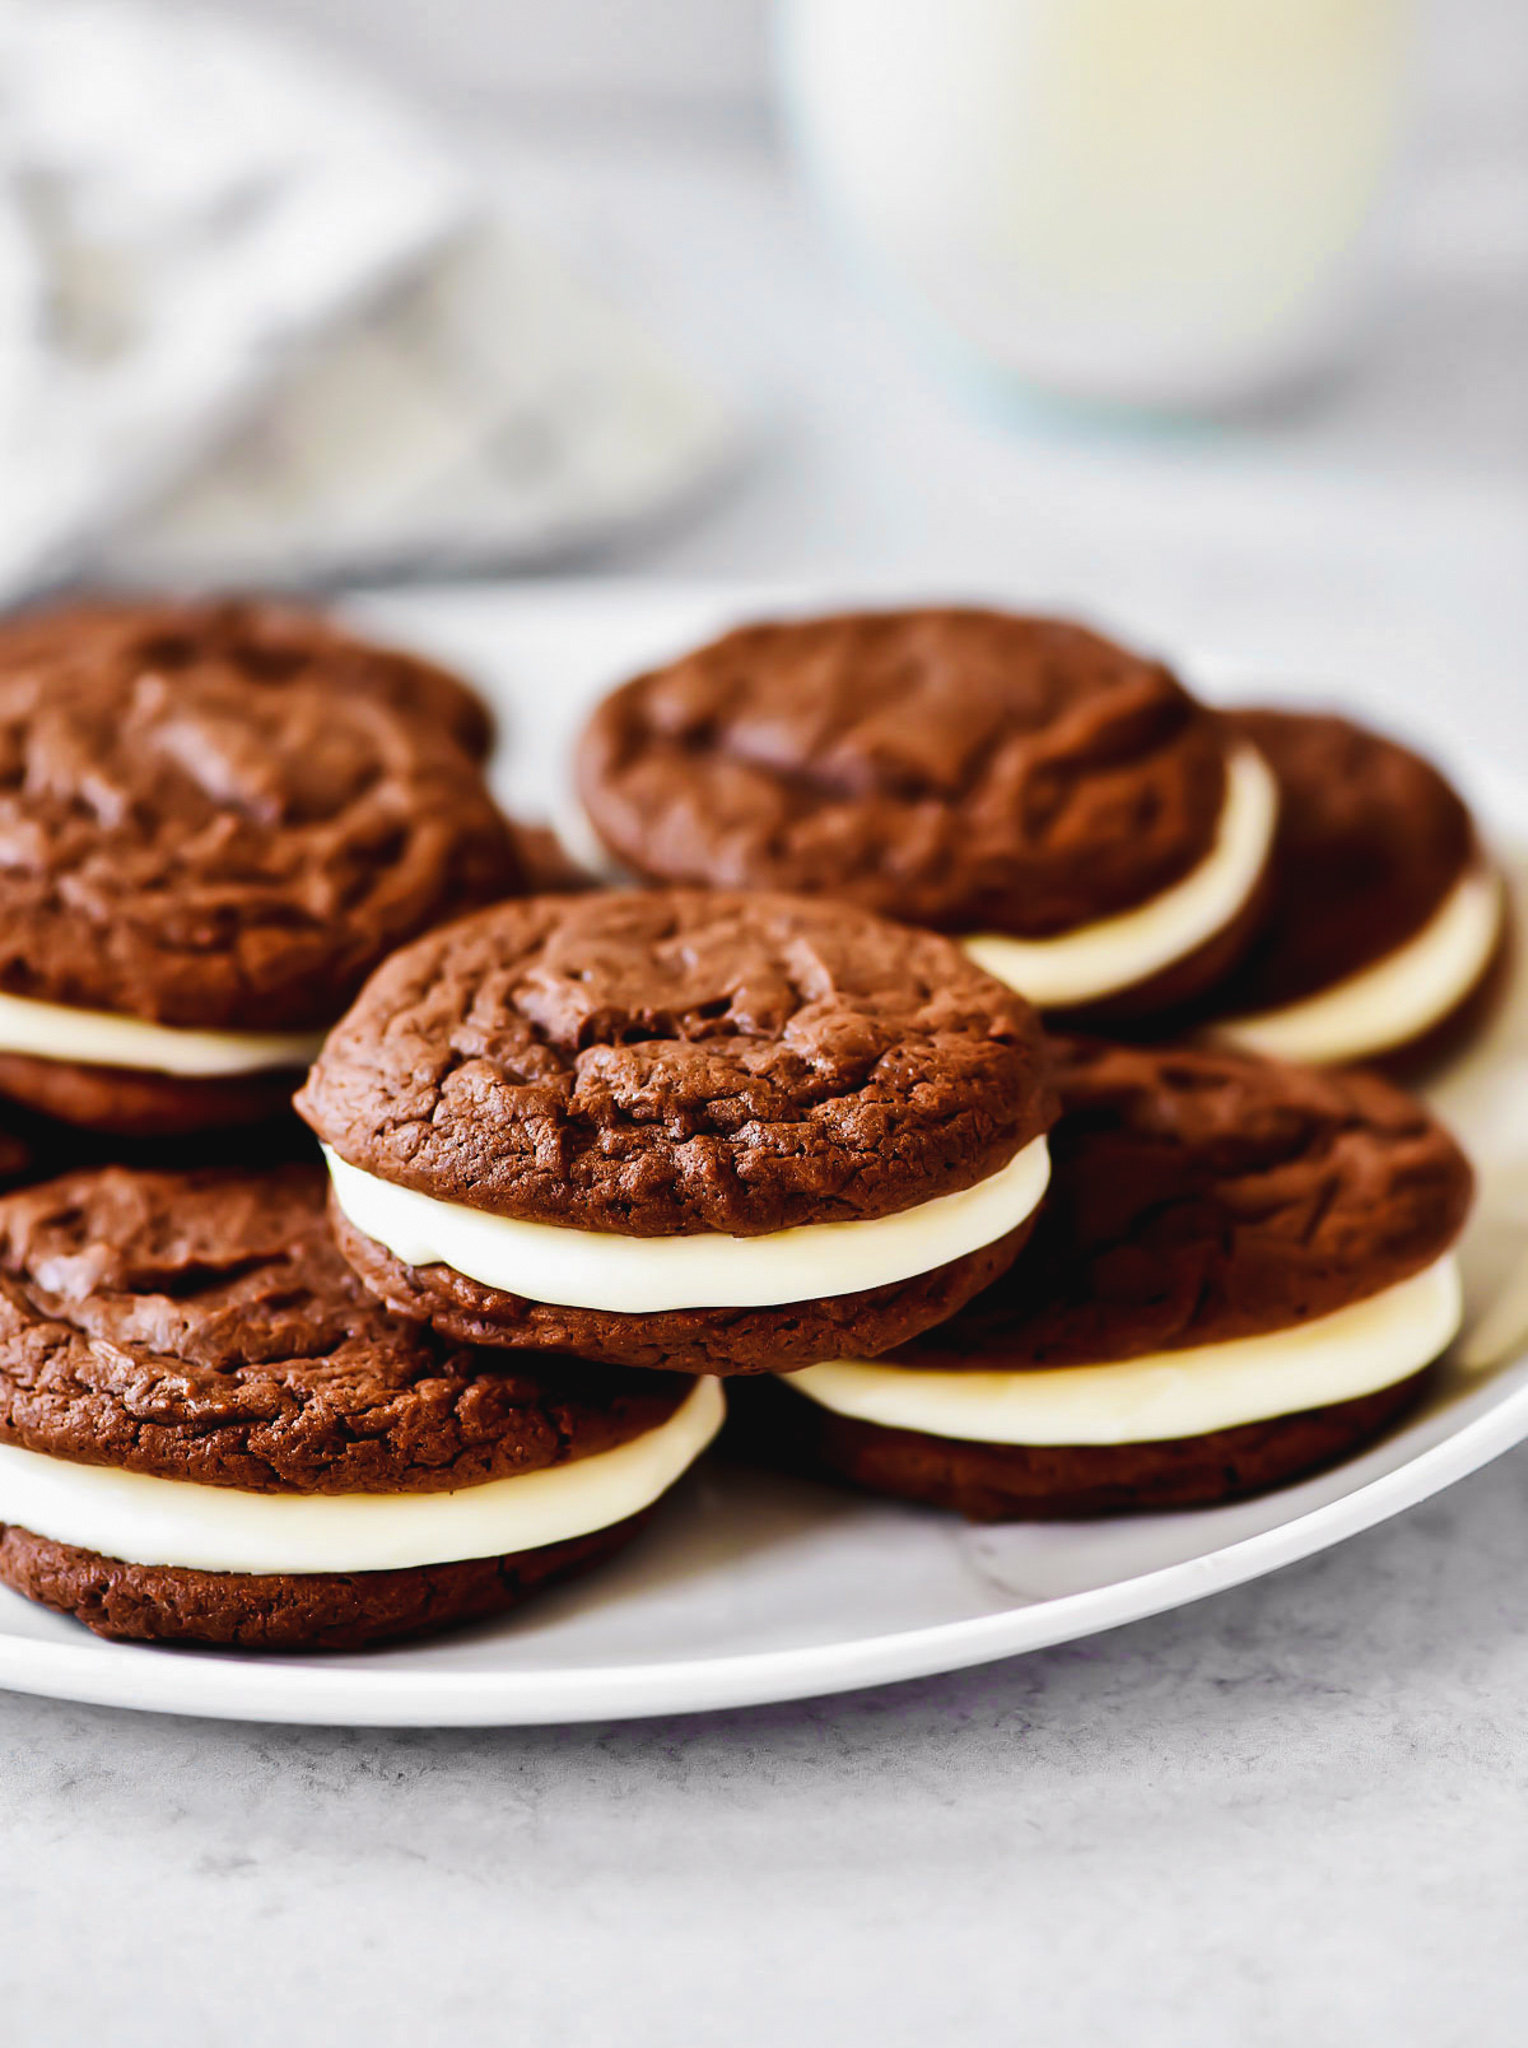 Homemade Oreo Cookies are delicious, chocolatey cookies with a heavenly cream cheese filling. Life-in-the-Lofthouse.com